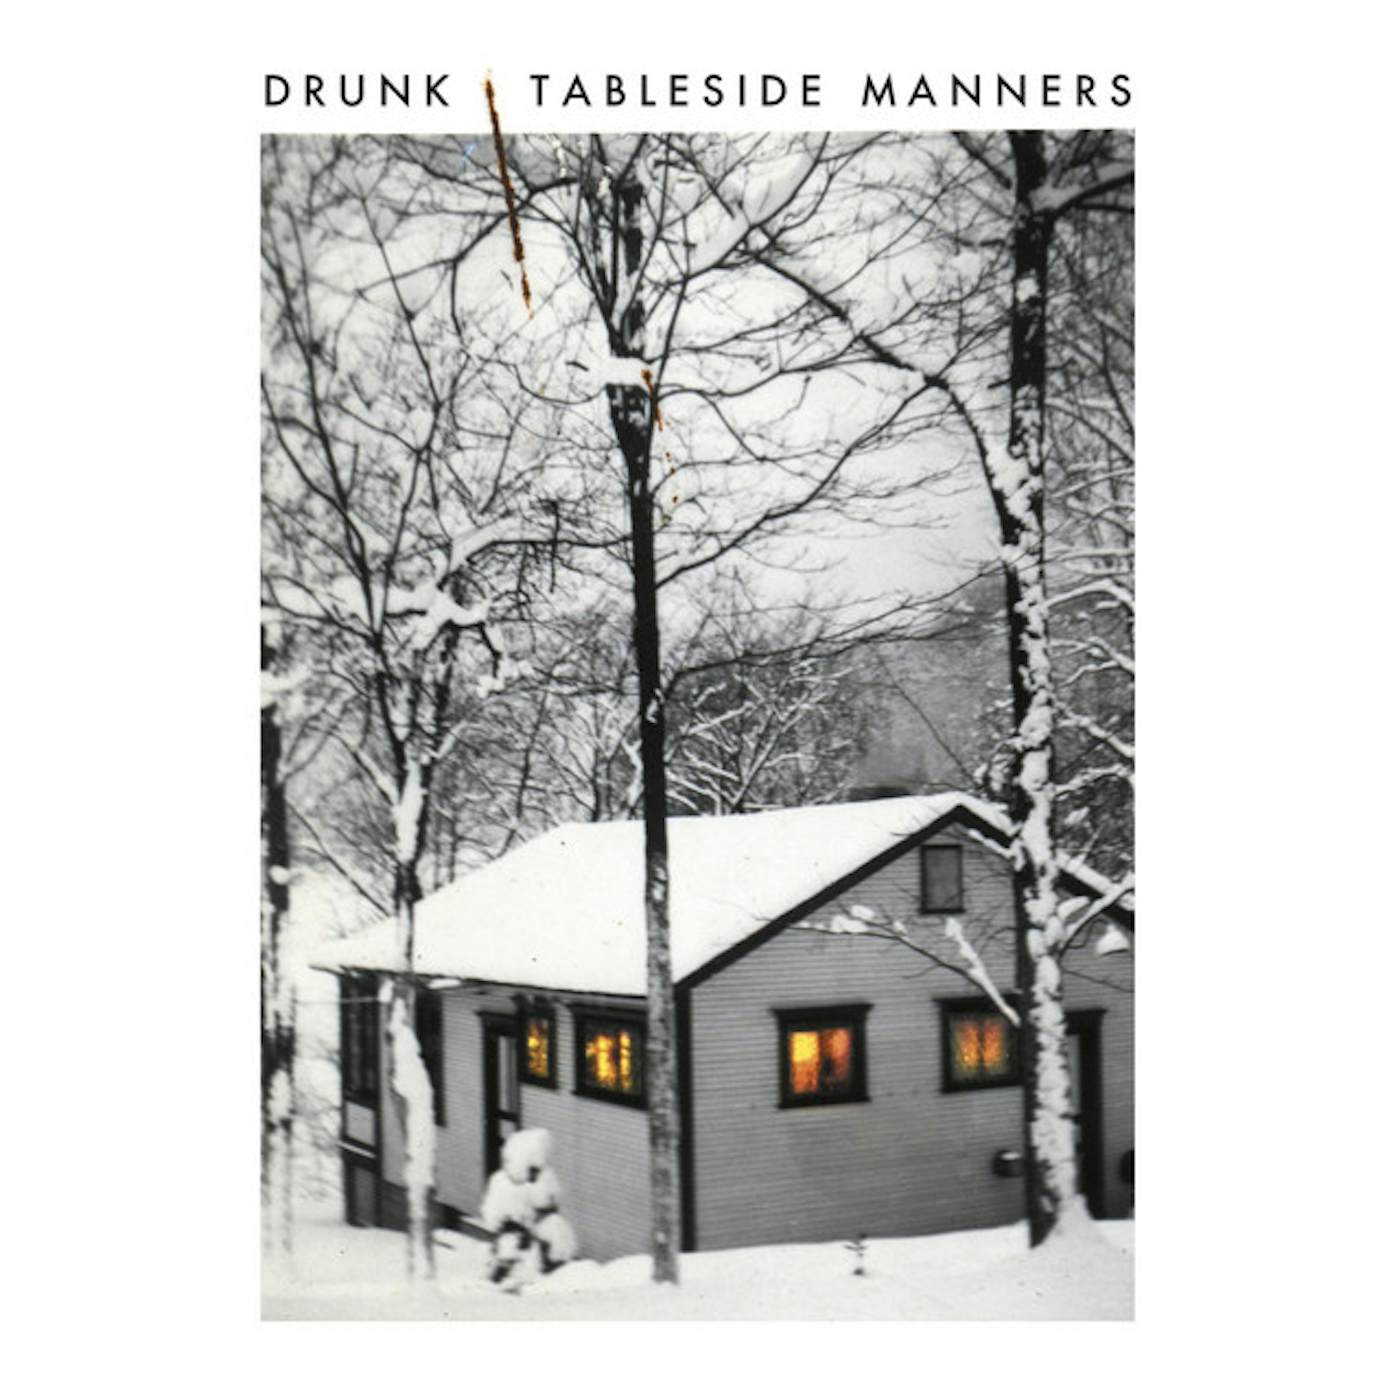 Drunk TABLESIDE MANNERS CD